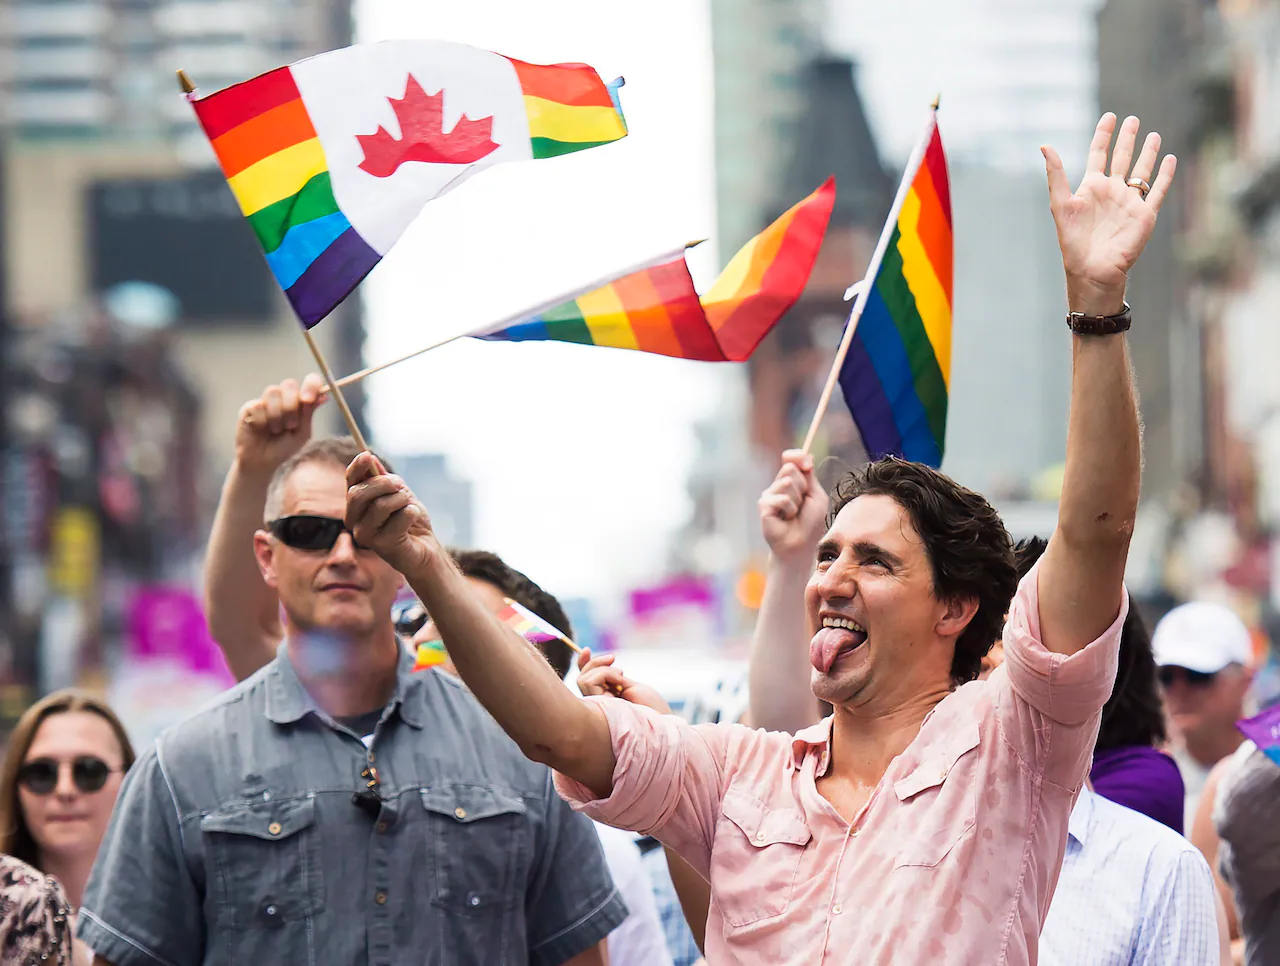 The Canadian government says "Pride Season" now goes from June to September